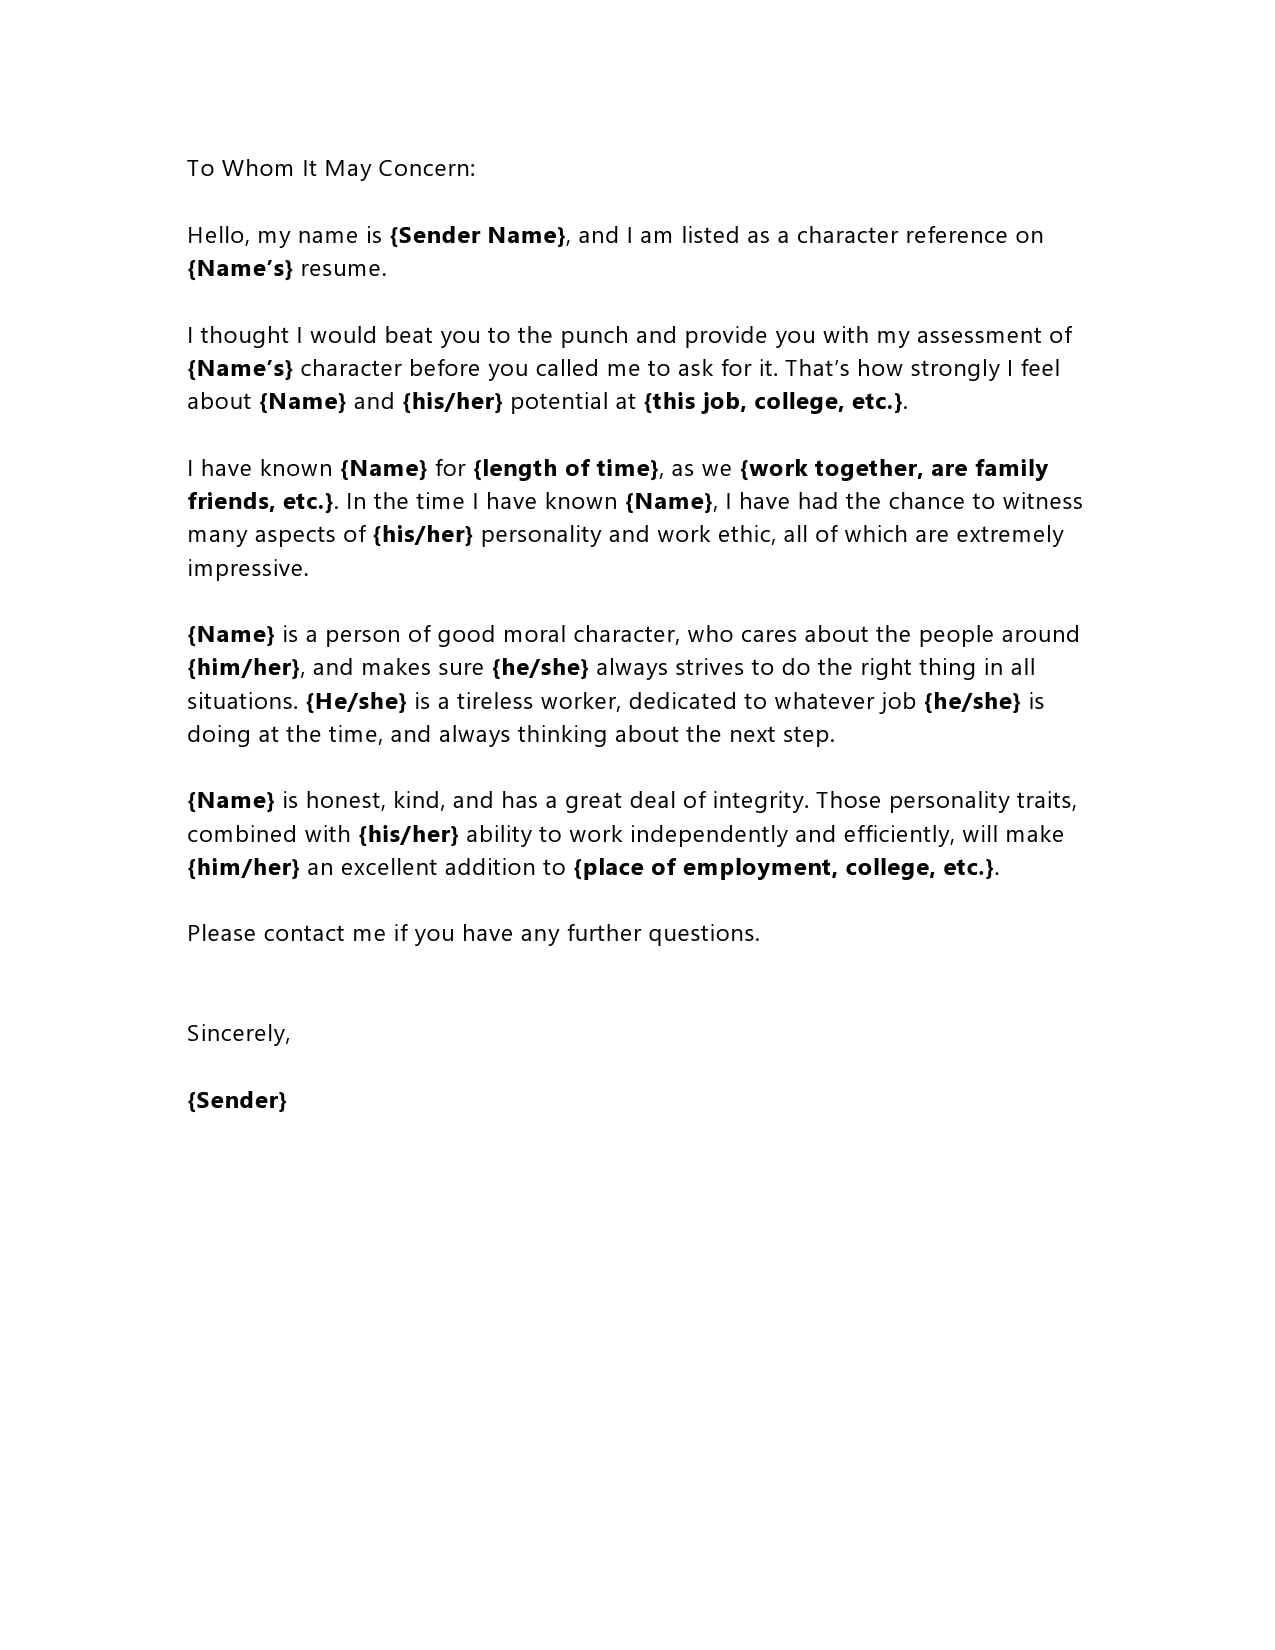 employee-sample-character-reference-letter-for-court-pdf